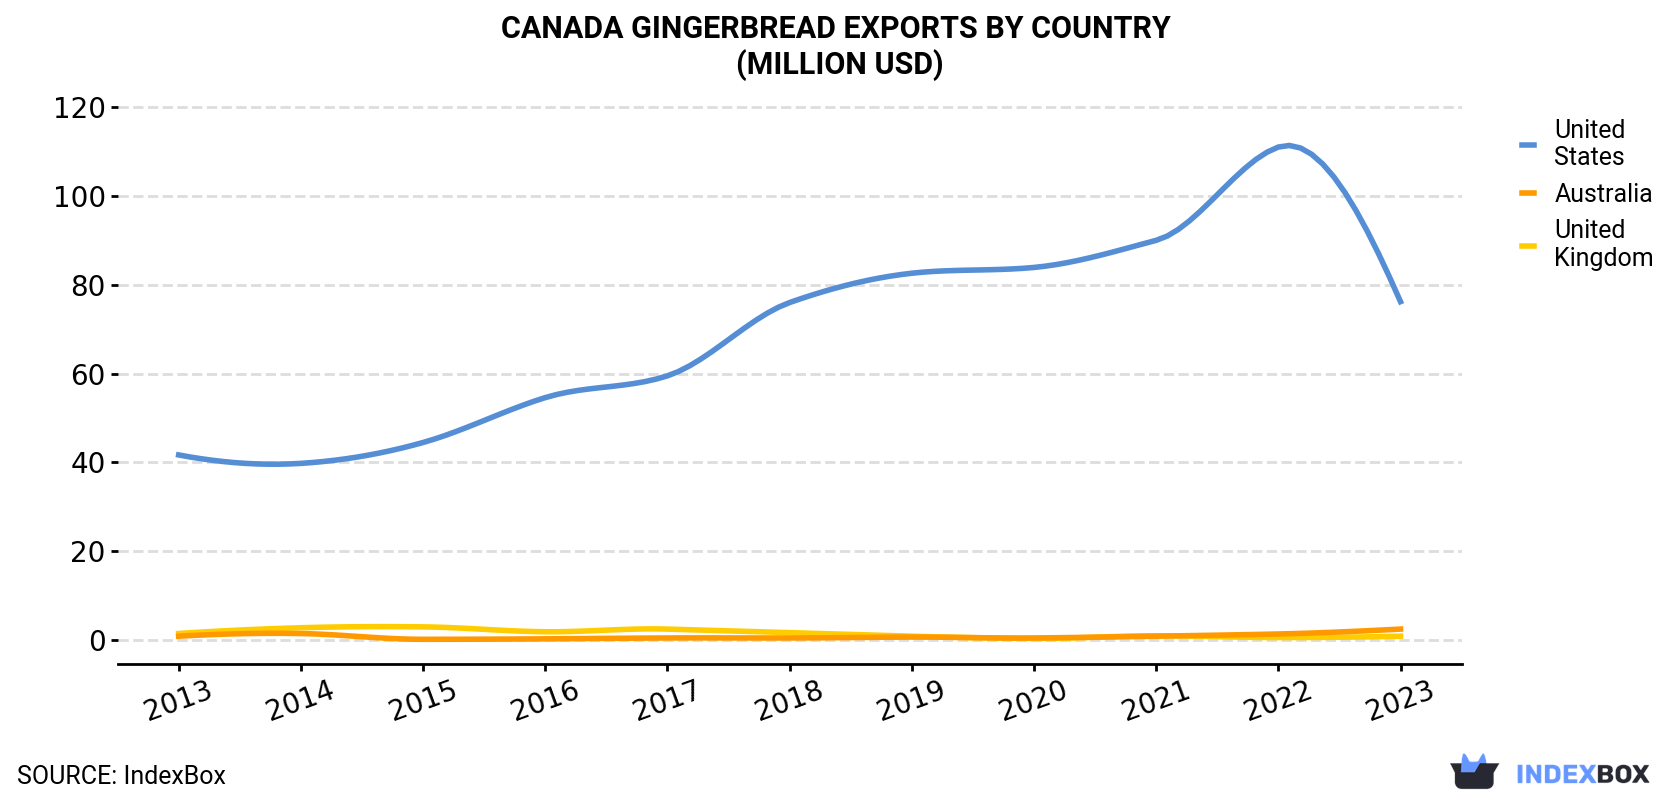 Canada Gingerbread Exports By Country (Million USD)